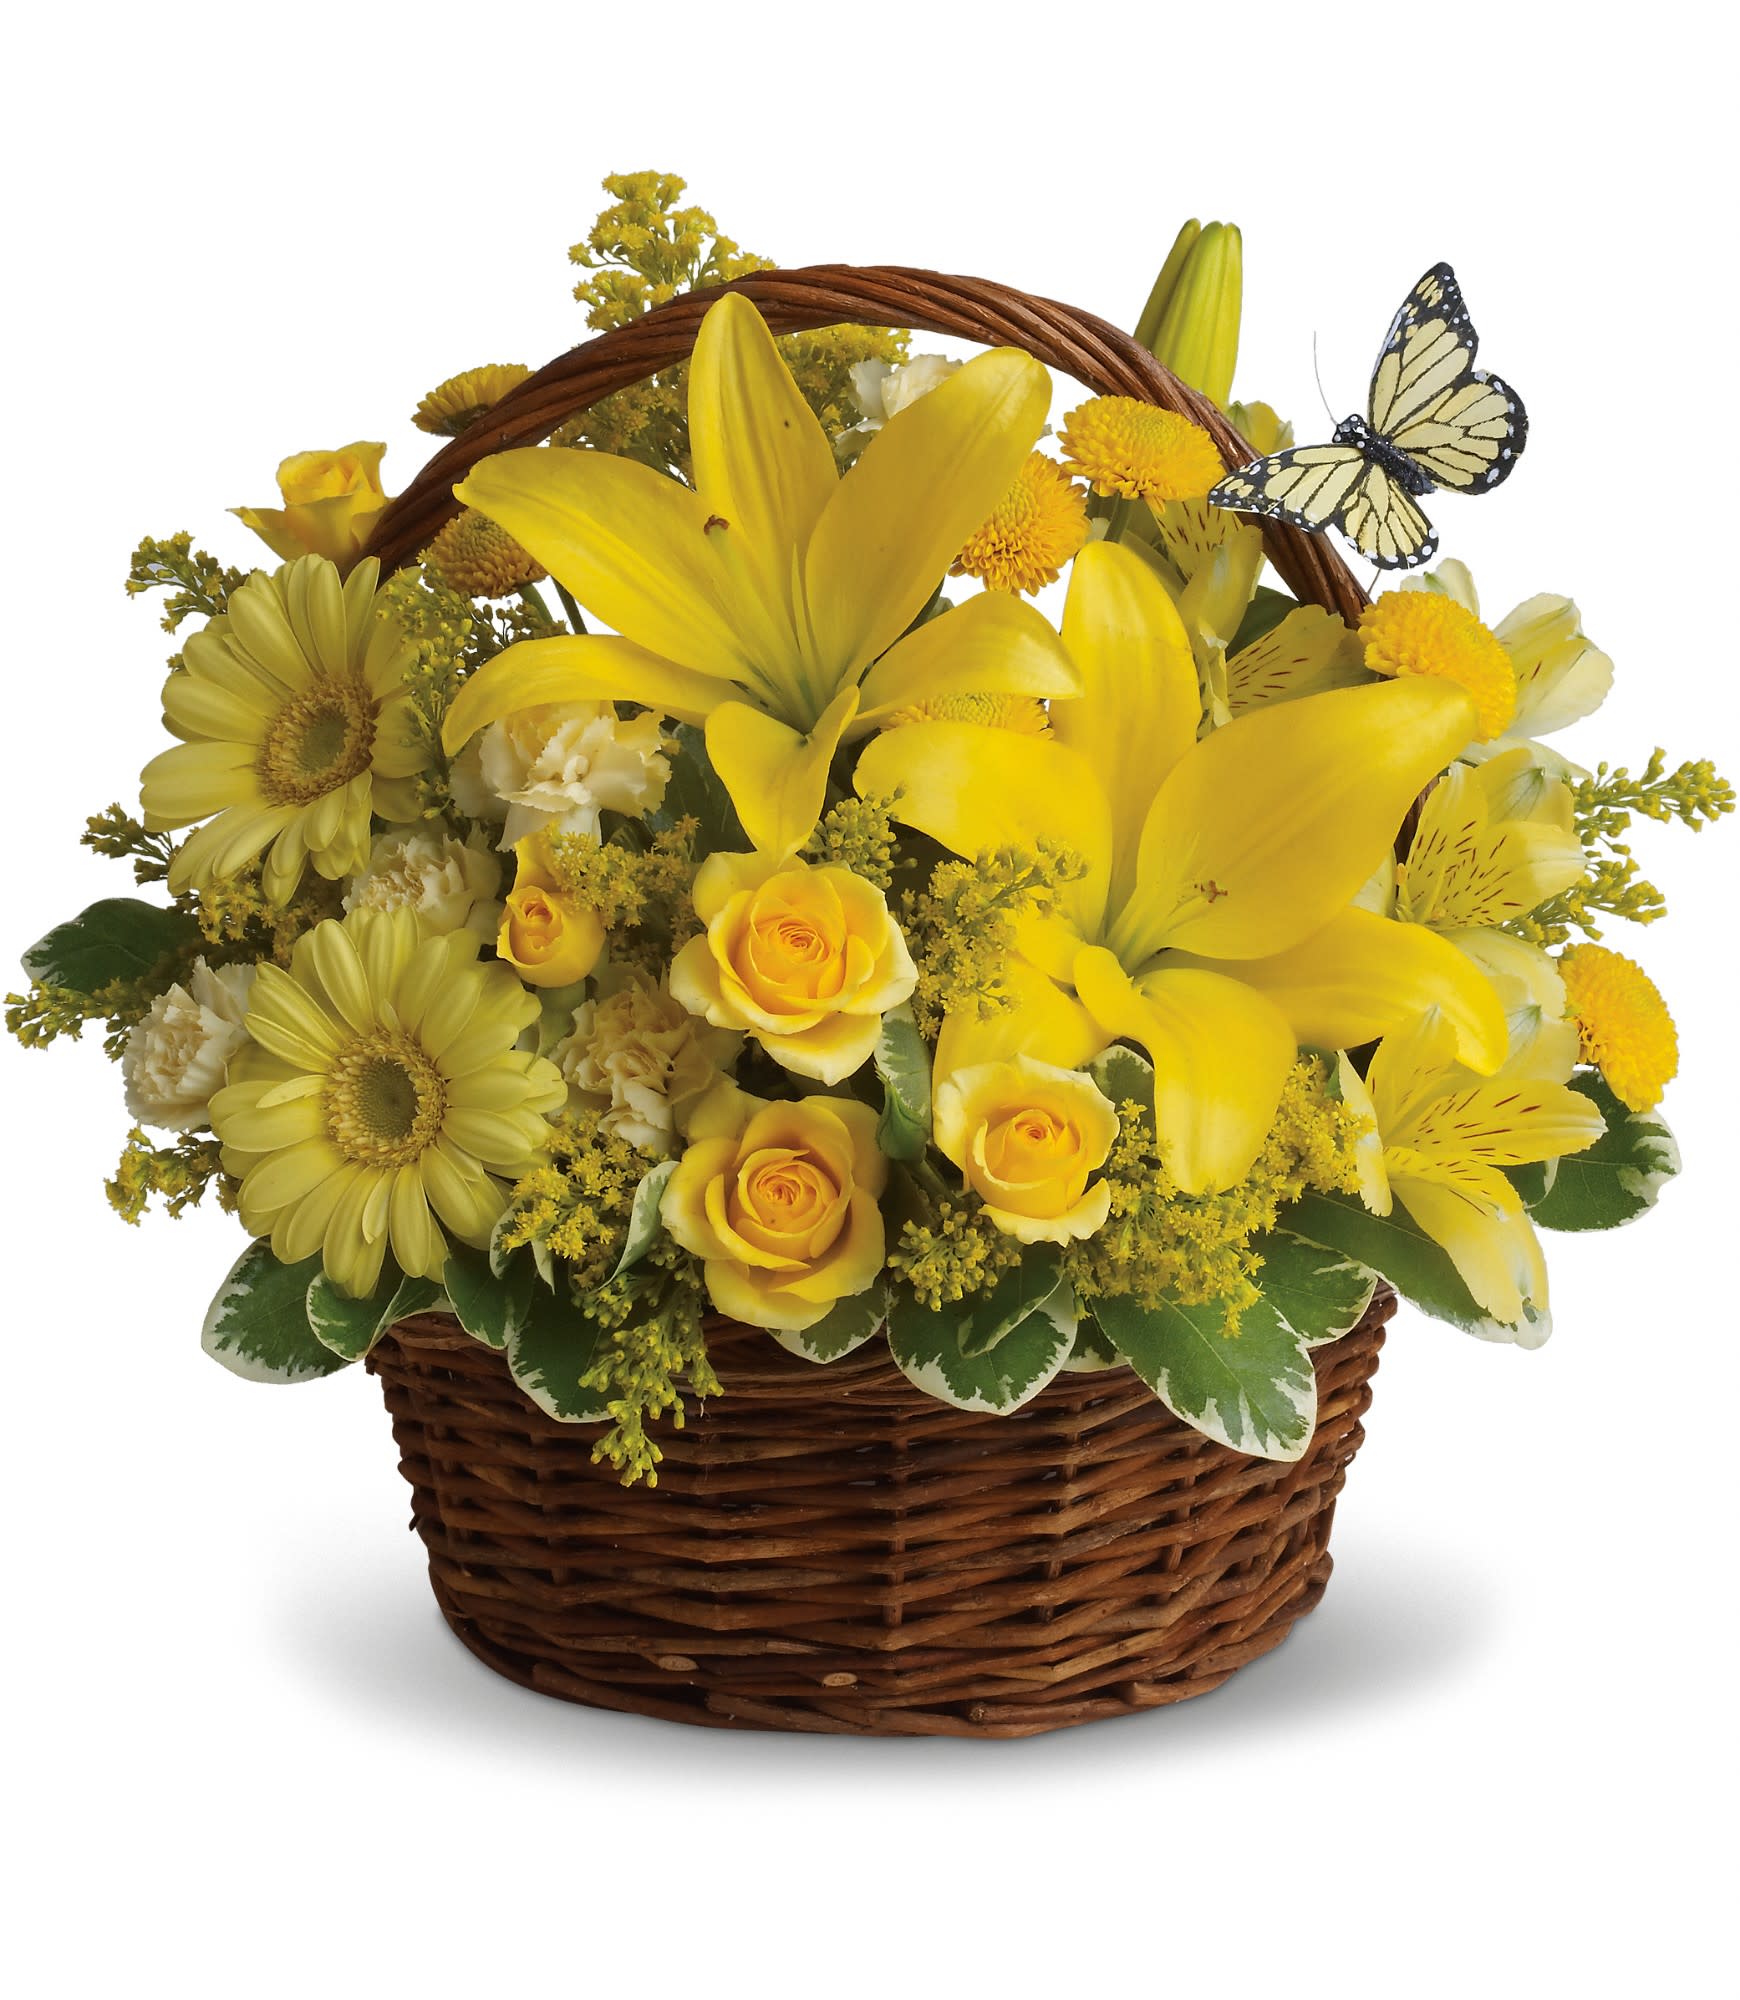 Basket Full of Wishes - Wishes do come true, by the basketful, actually. This delightful arrangement is so full of sunny blossoms, it even includes a pretty yellow butterfly who obviously feels right at home, basking in the warmth.    Brilliant yellow spray roses, asiatic lilies, miniature gerberas, carnations, alstroemeria, button spray chrysanthemums and delightful greenery are joined by a delicate butterfly in an oval basket. It's a basket of wonder and wishes!    Approximately 12&quot; W x 11&quot; H    Orientation: All-Around    As Shown : T27-2A  Deluxe : T27-2B  Premium : T27-2C